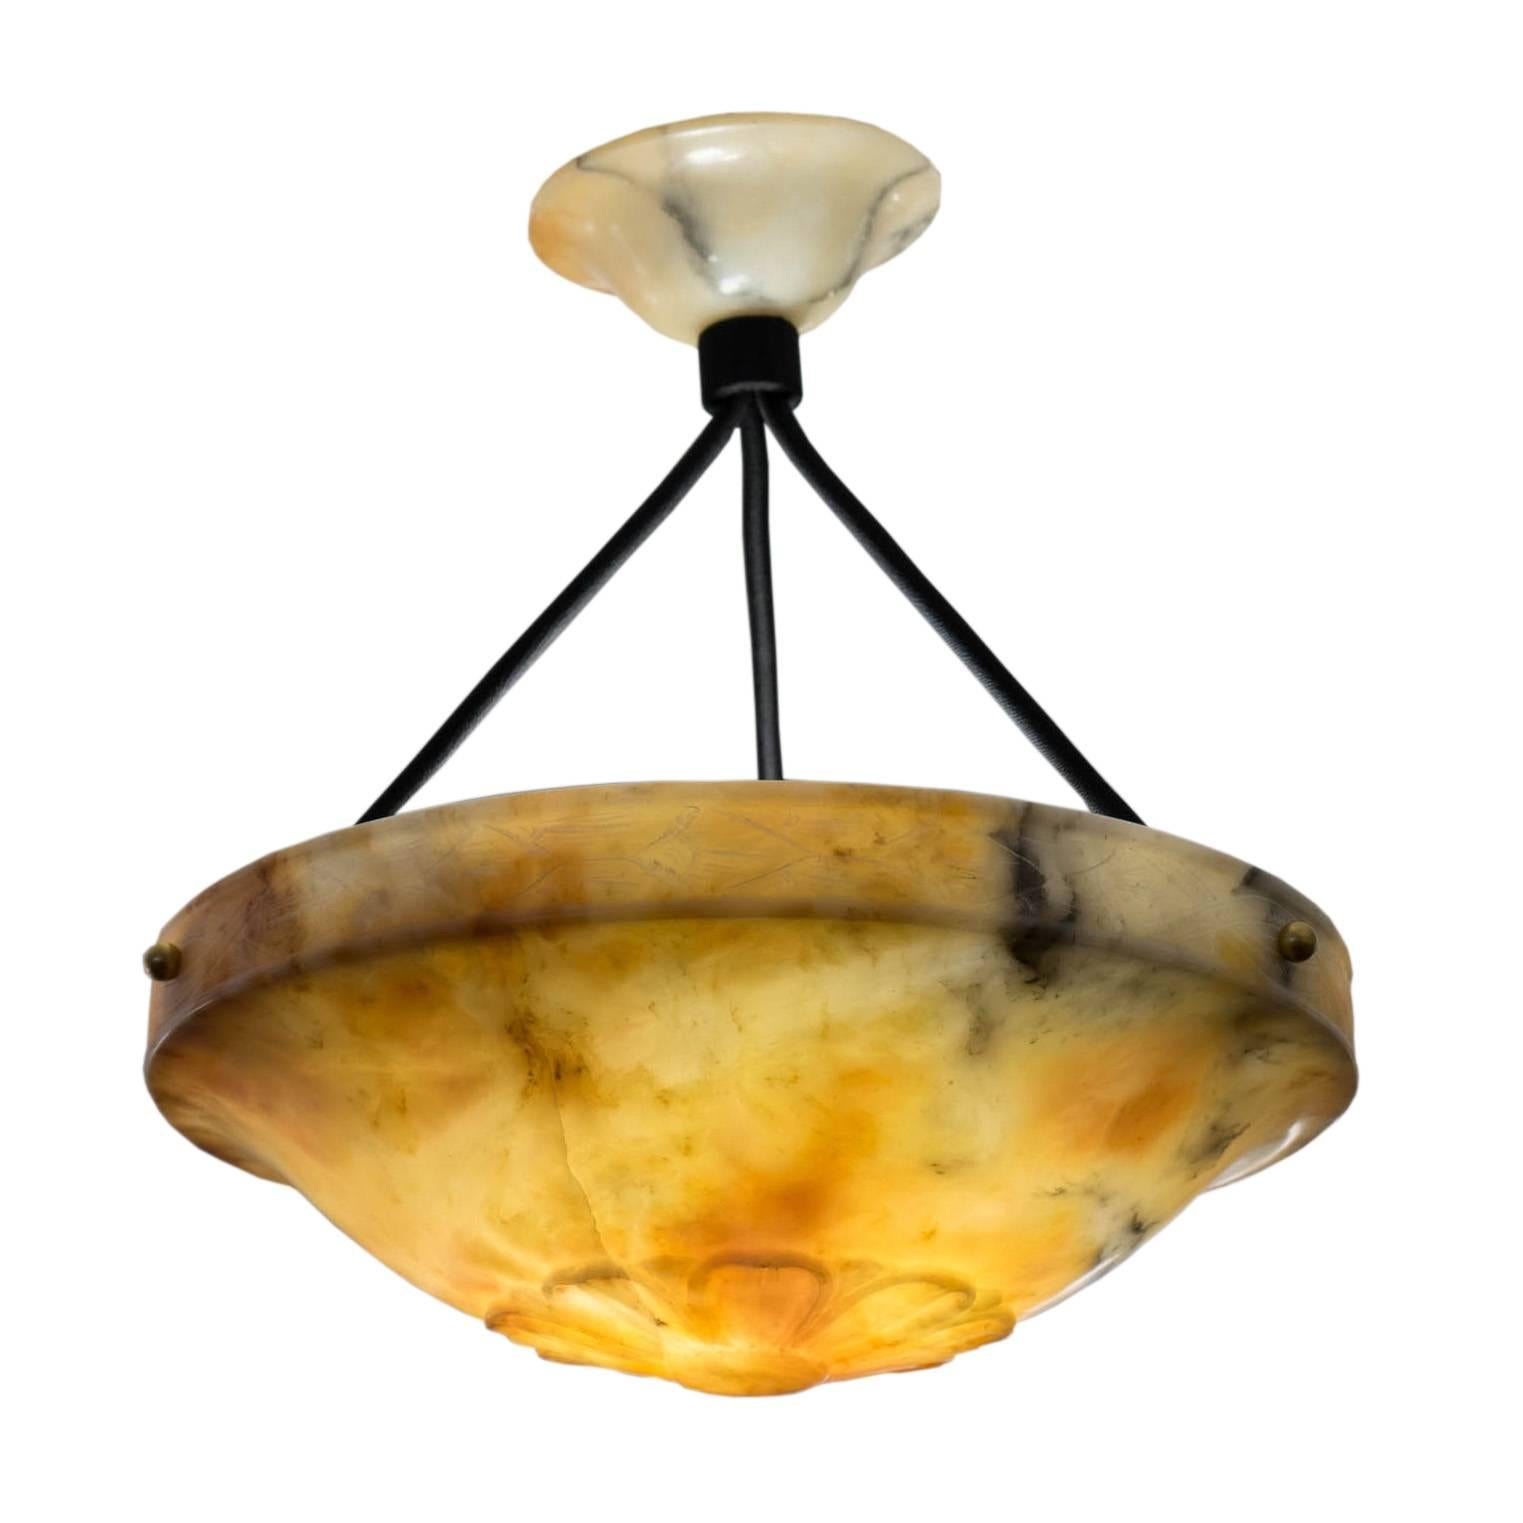 This jewel of a fixture dresses up any small space with classic elegance. A hard edged double-banded rim rests above a curved bowl with a fleurette gracing the center. Recently rewired to a short overall drop on black electrified cords, using the